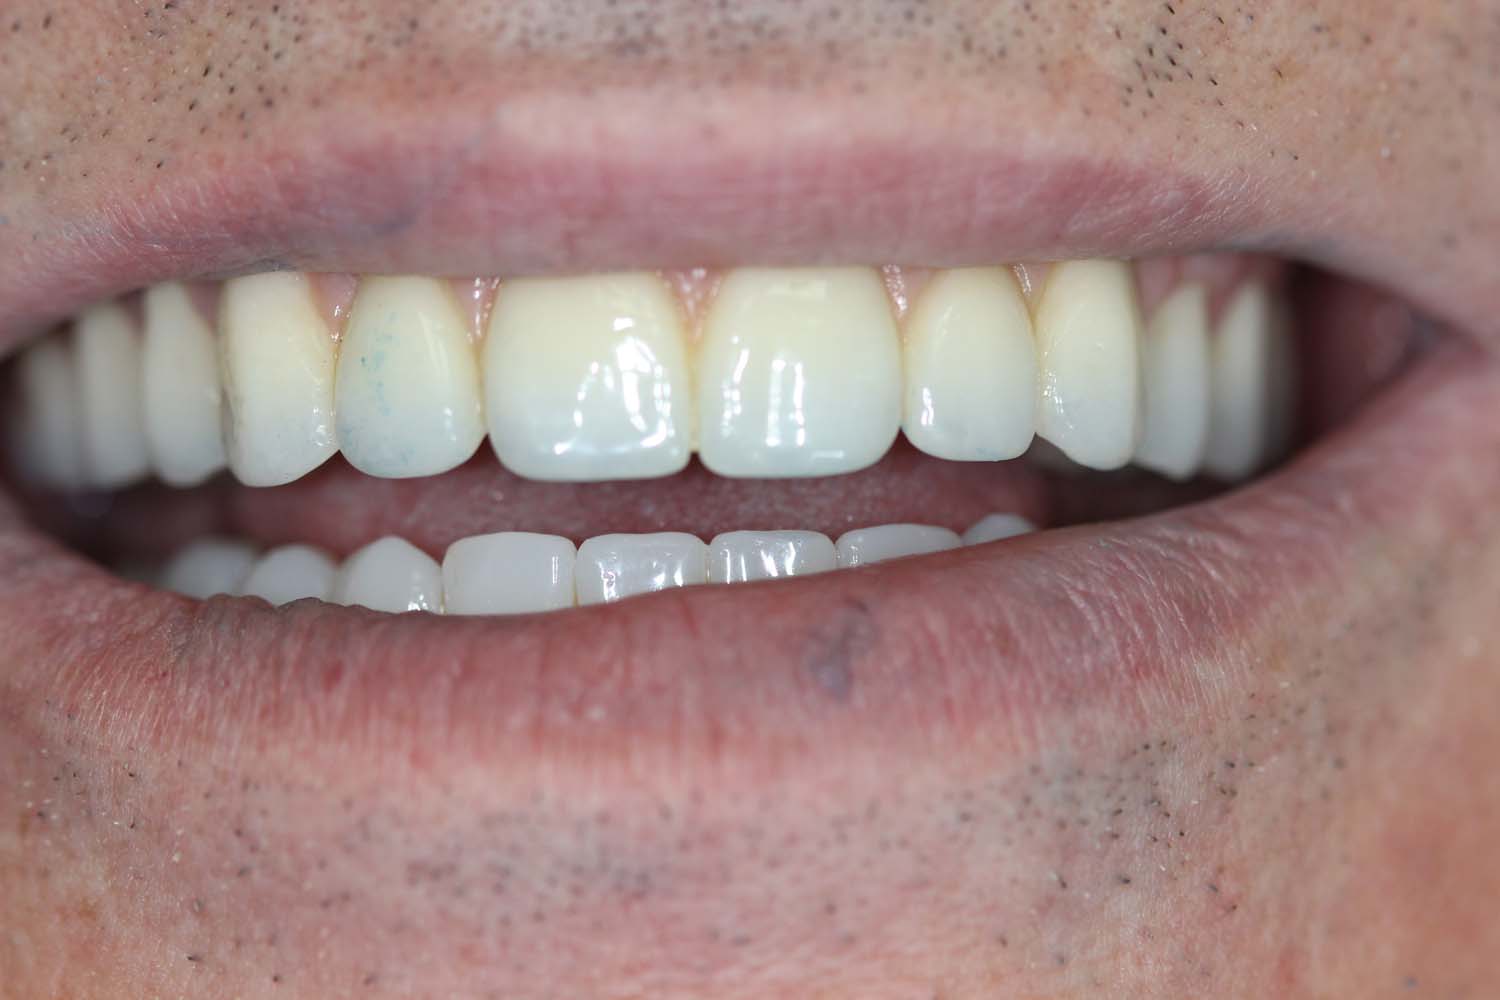 Post-treatment photo highlighting the remarkable results of cosmetic dentistry at Princeton Prosthodontics.